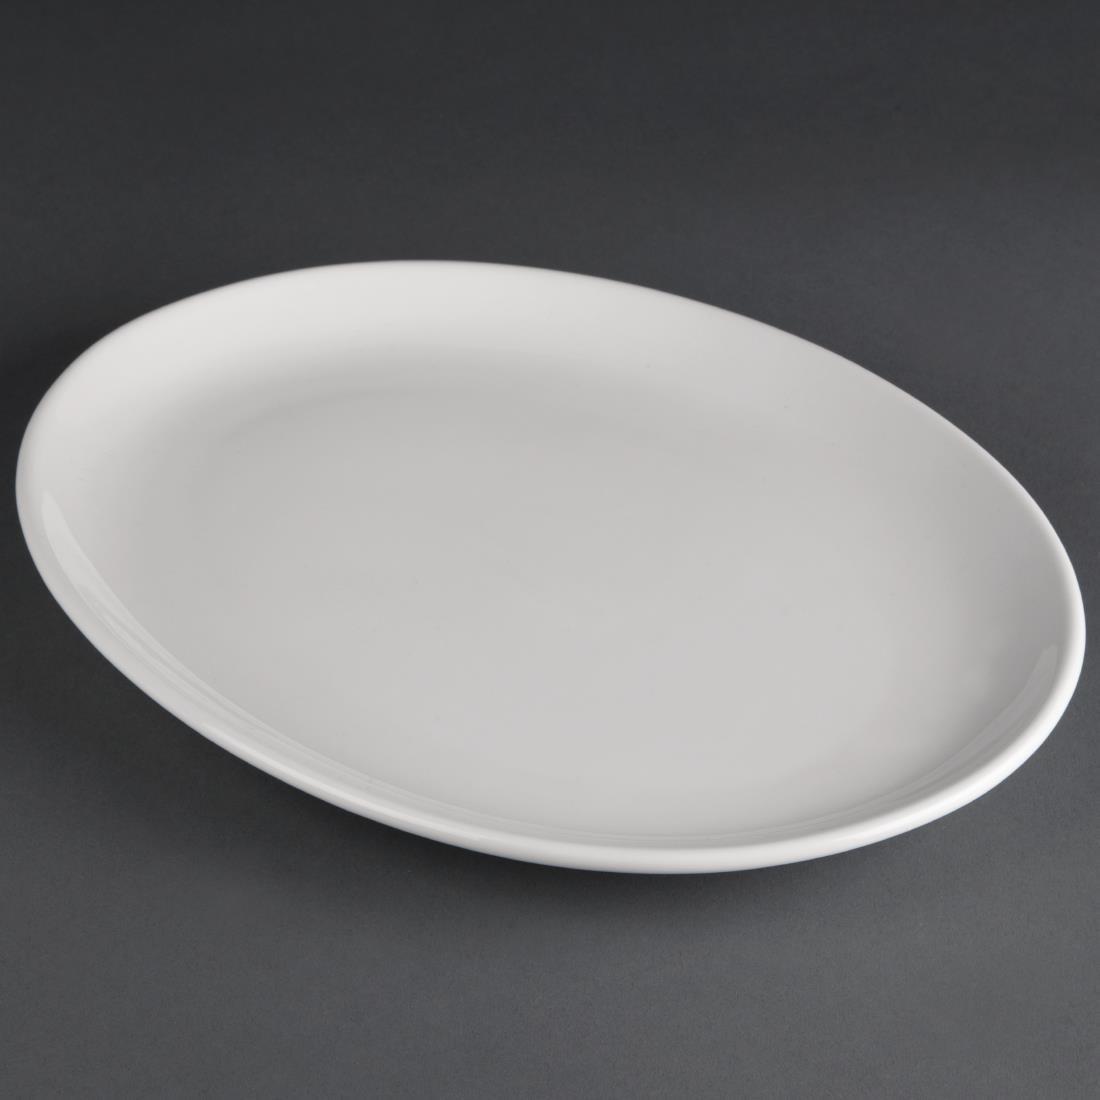 Olympia Athena Oval Coupe Plates 305 x 241 mm (Pack of 6) - CC212  - 3